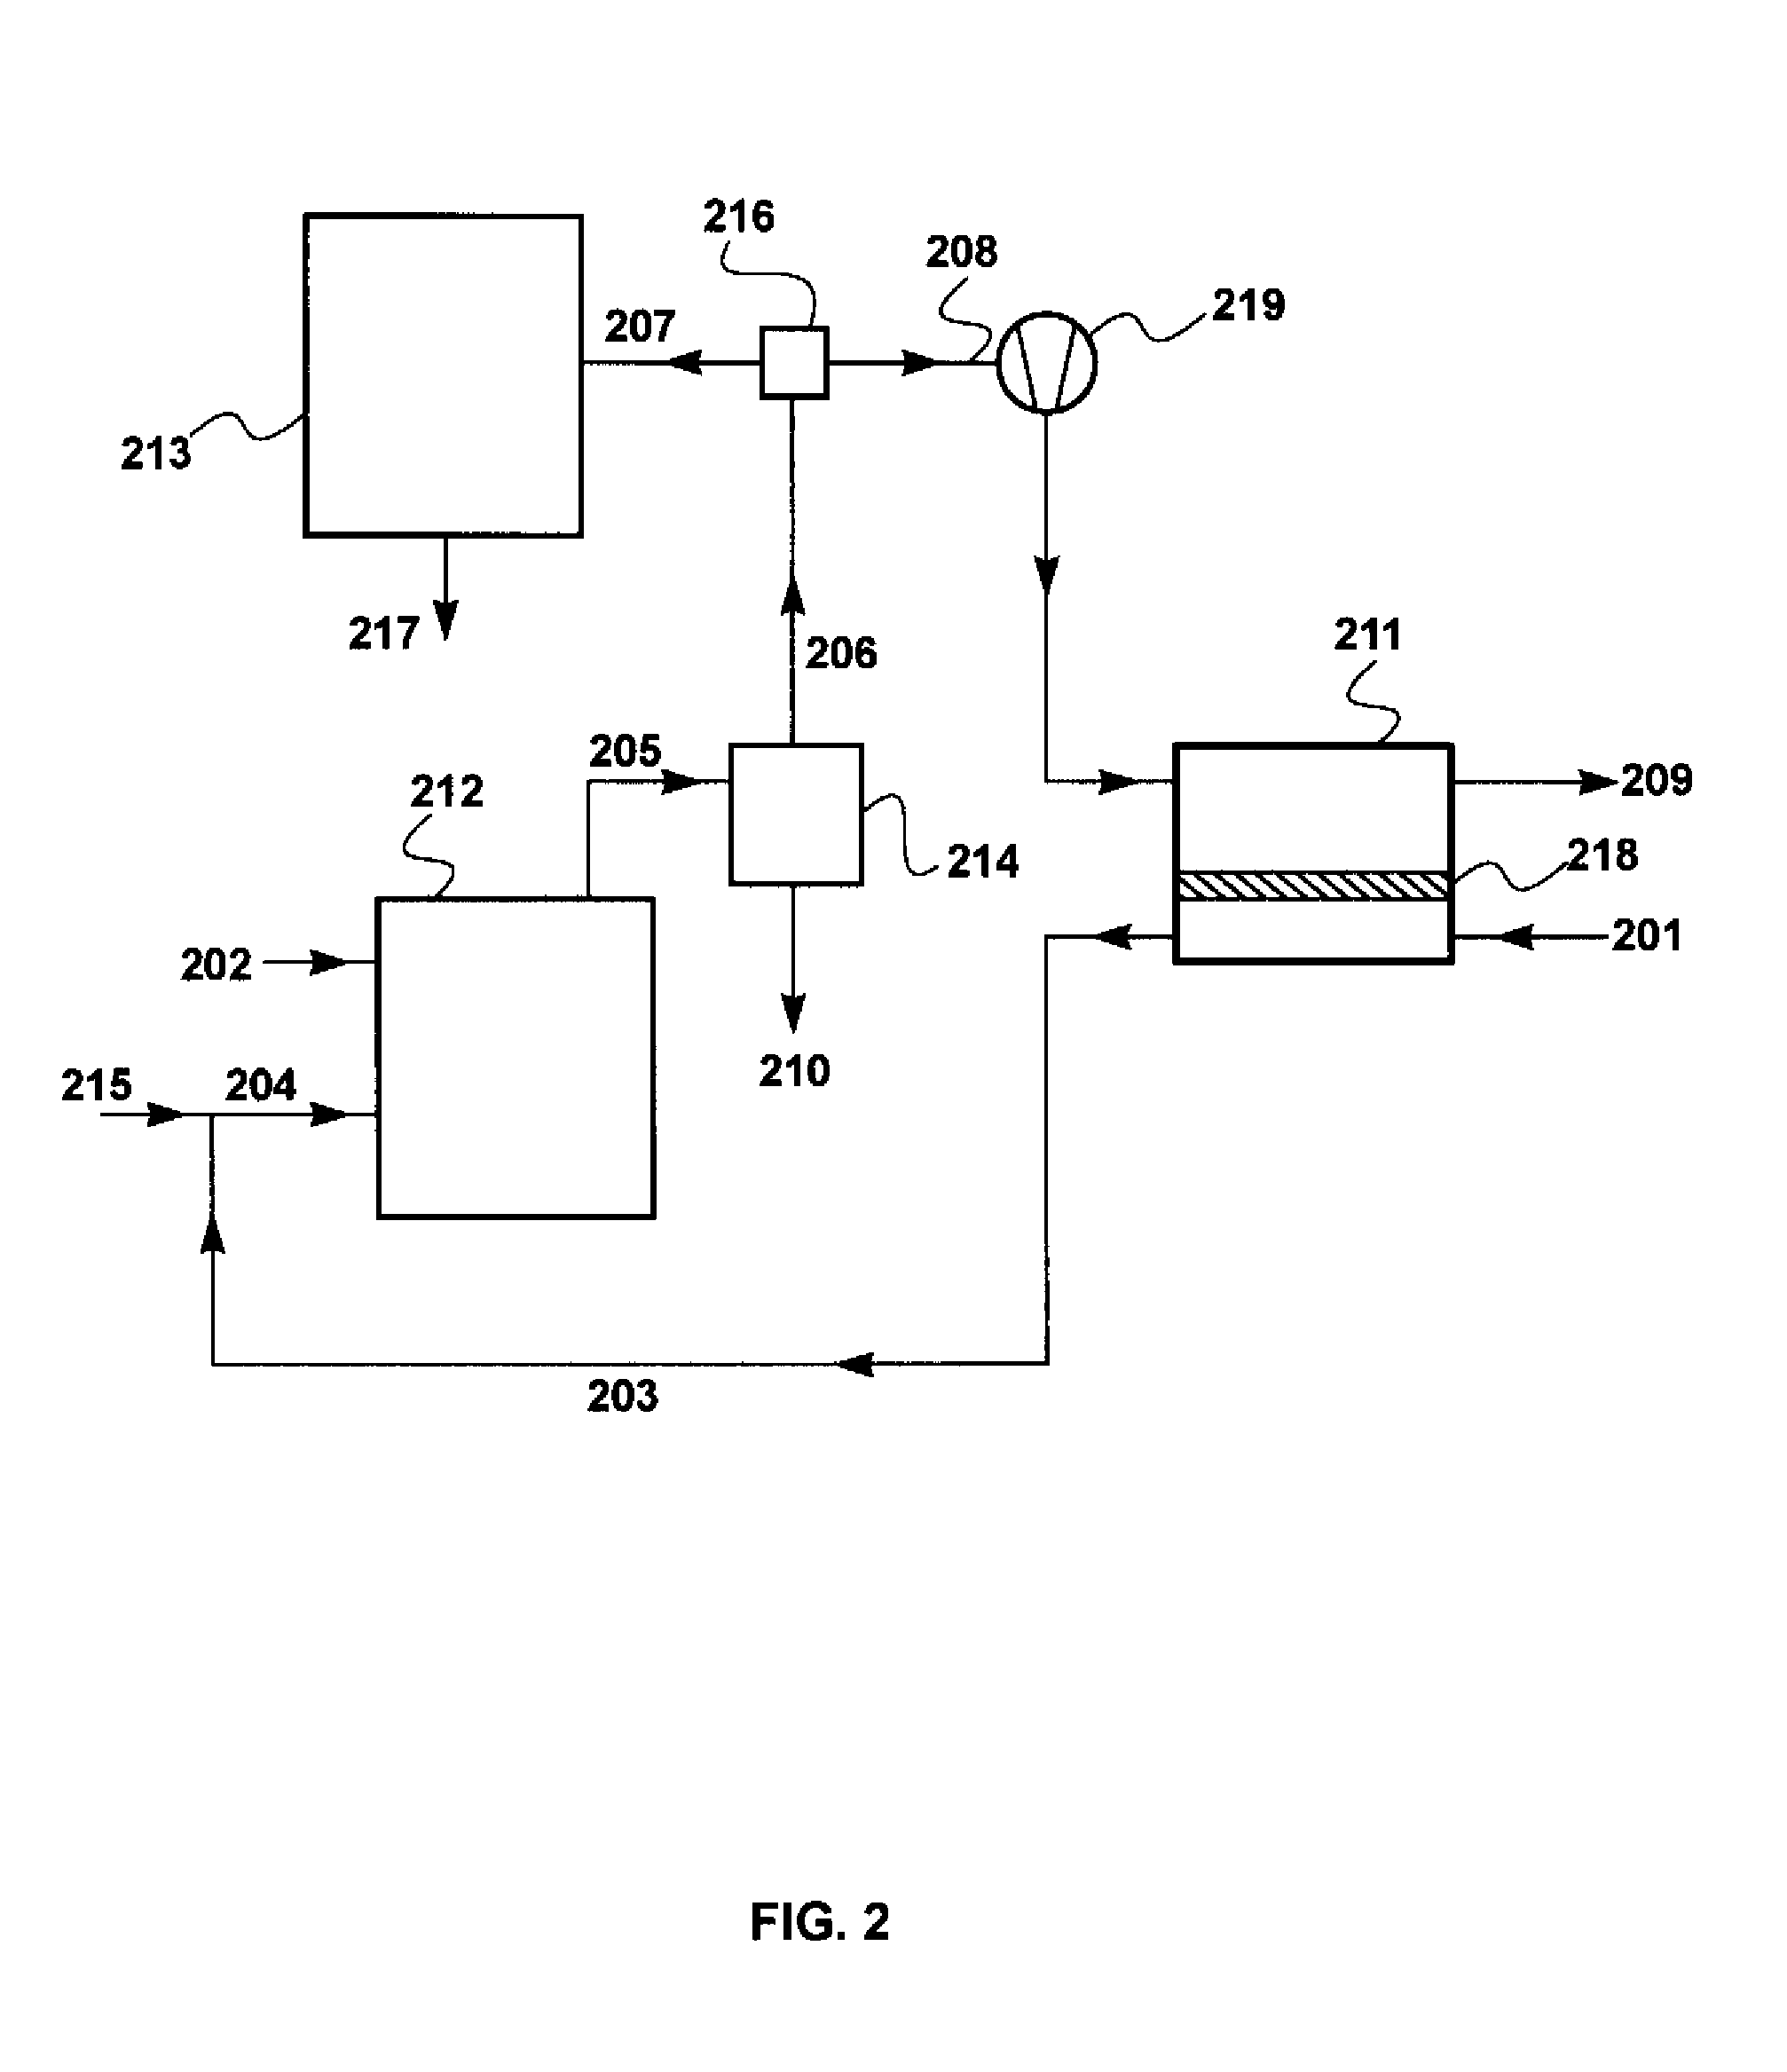 Combustion systems and power plants incorporating parallel carbon dioxide capture and sweep-based membrane separation units to remove carbon dioxide from combustion gases